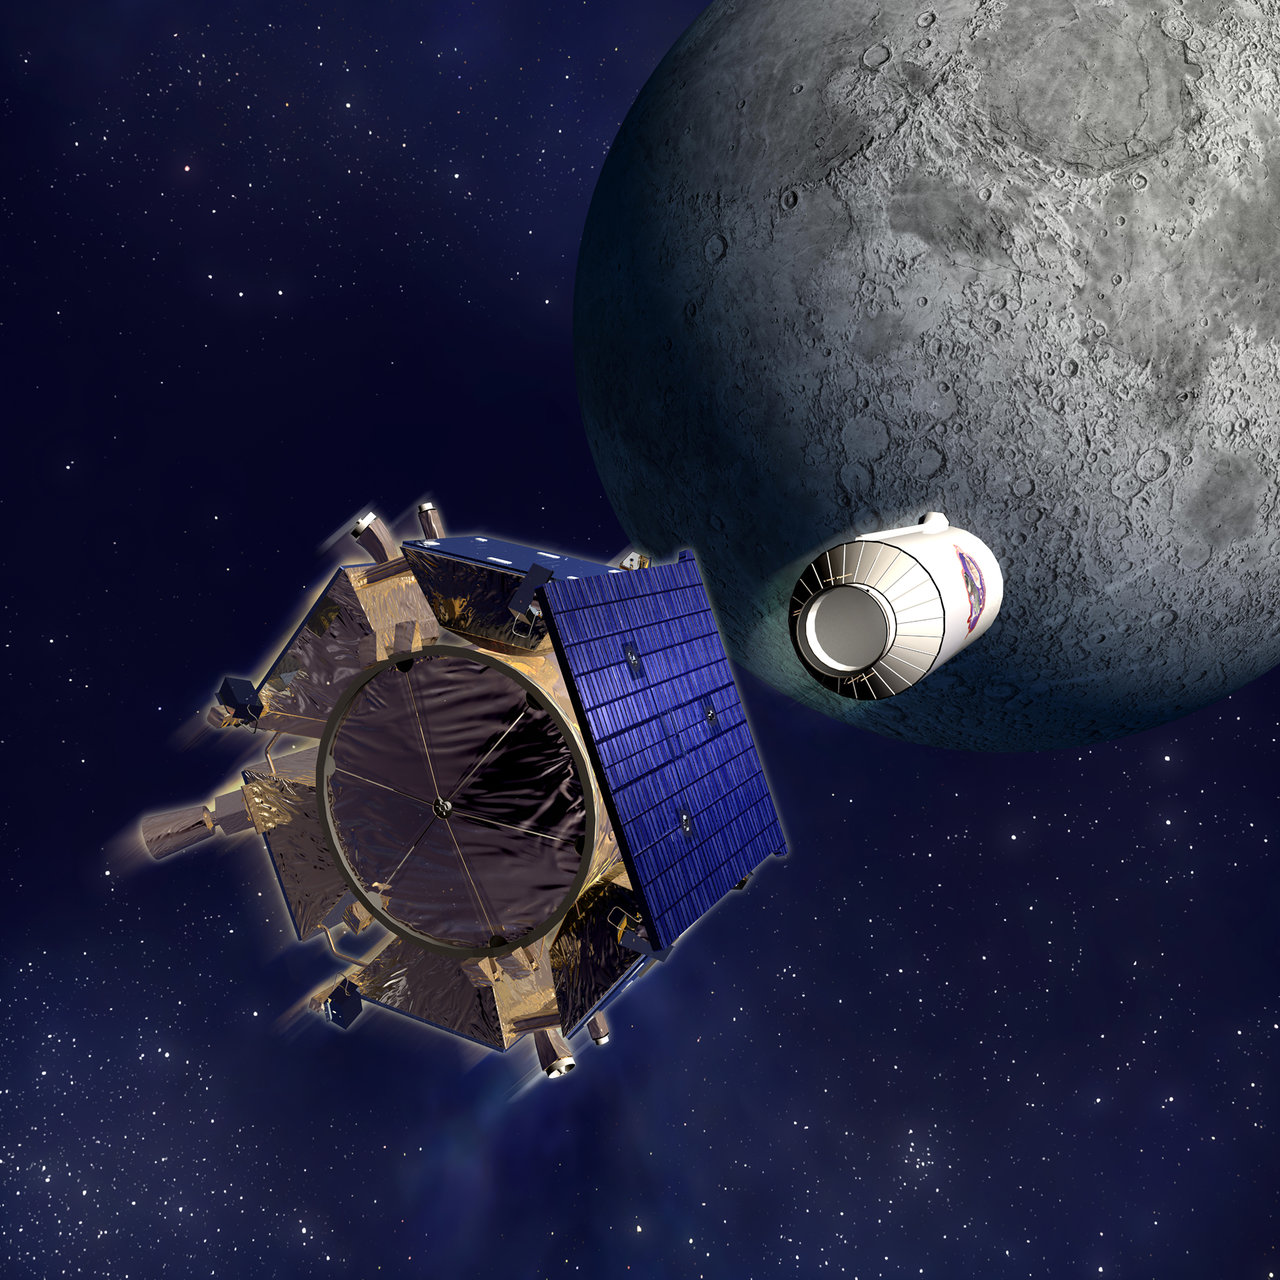 A spacecraft and rocket booster in space head toward the Moon